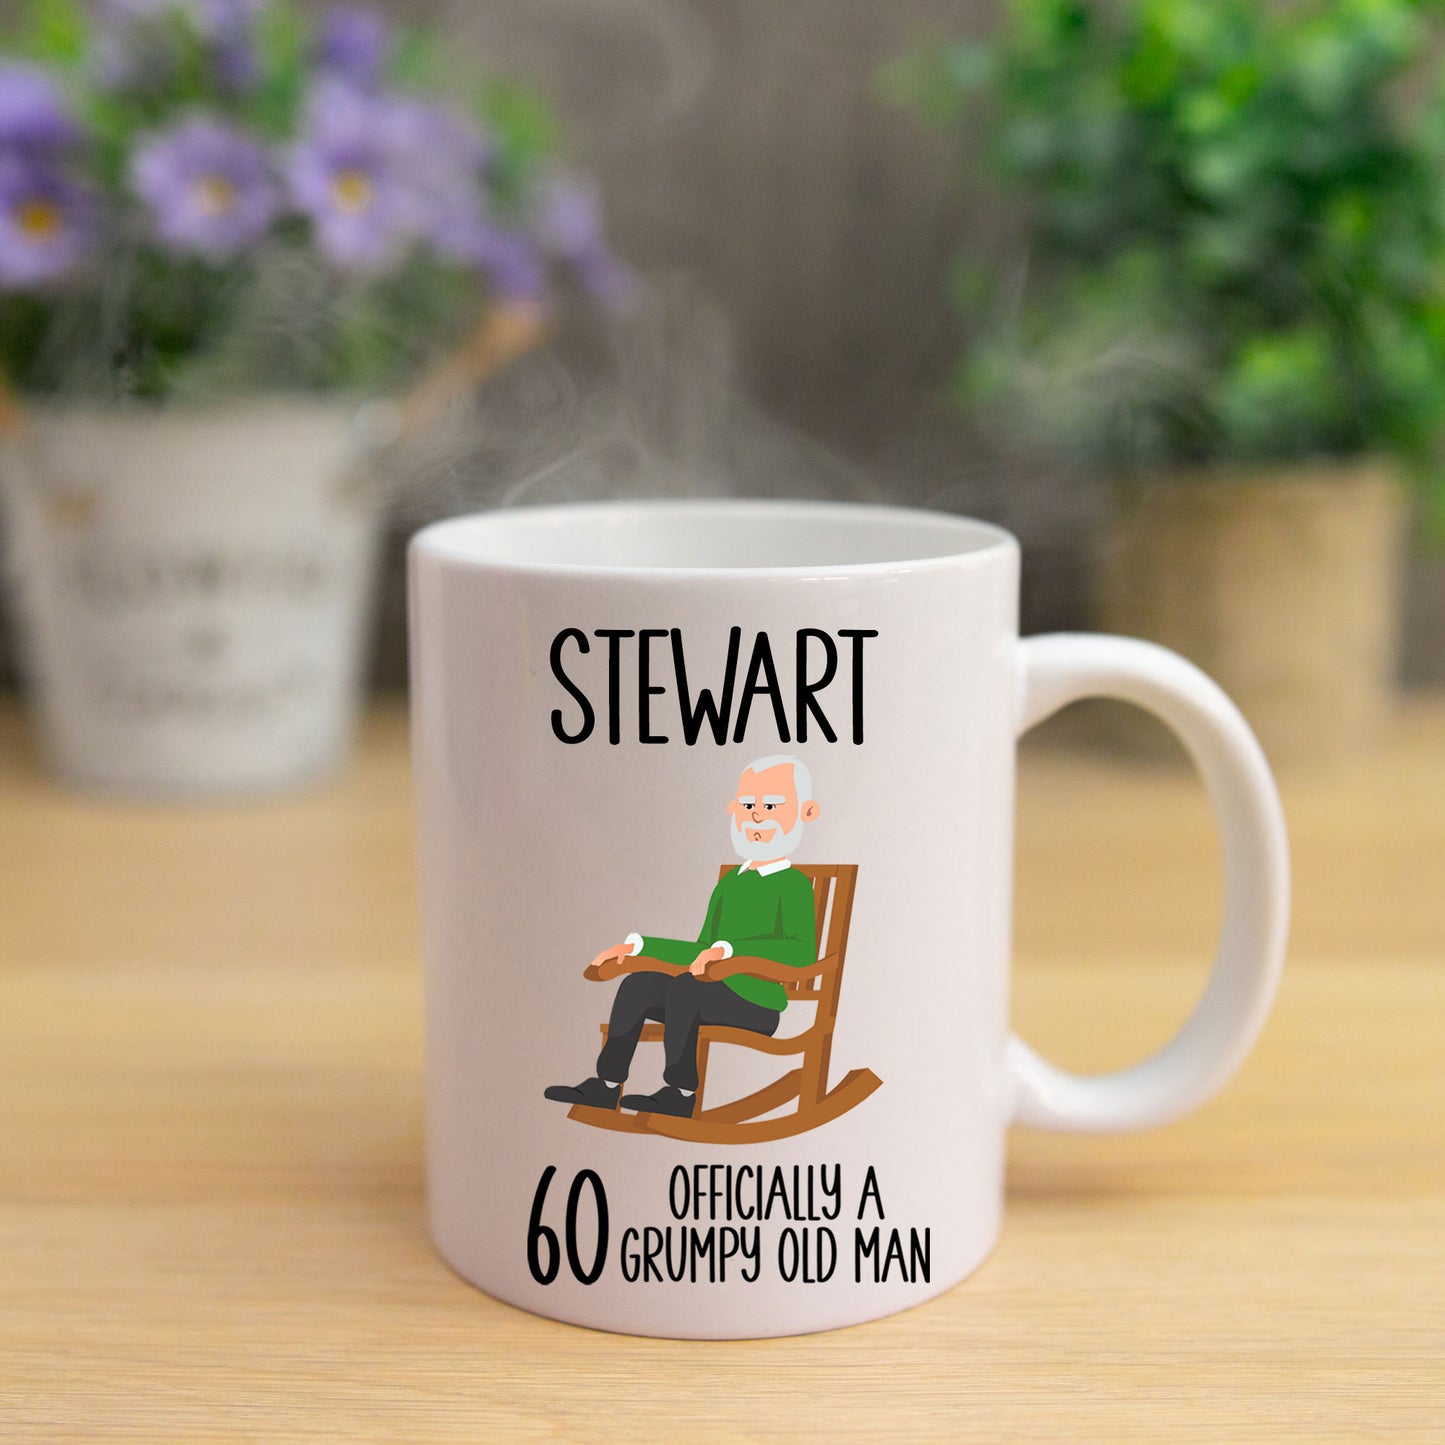 60 Officially A Grumpy Old Man Mug and/or Coaster Gift  - Always Looking Good -   